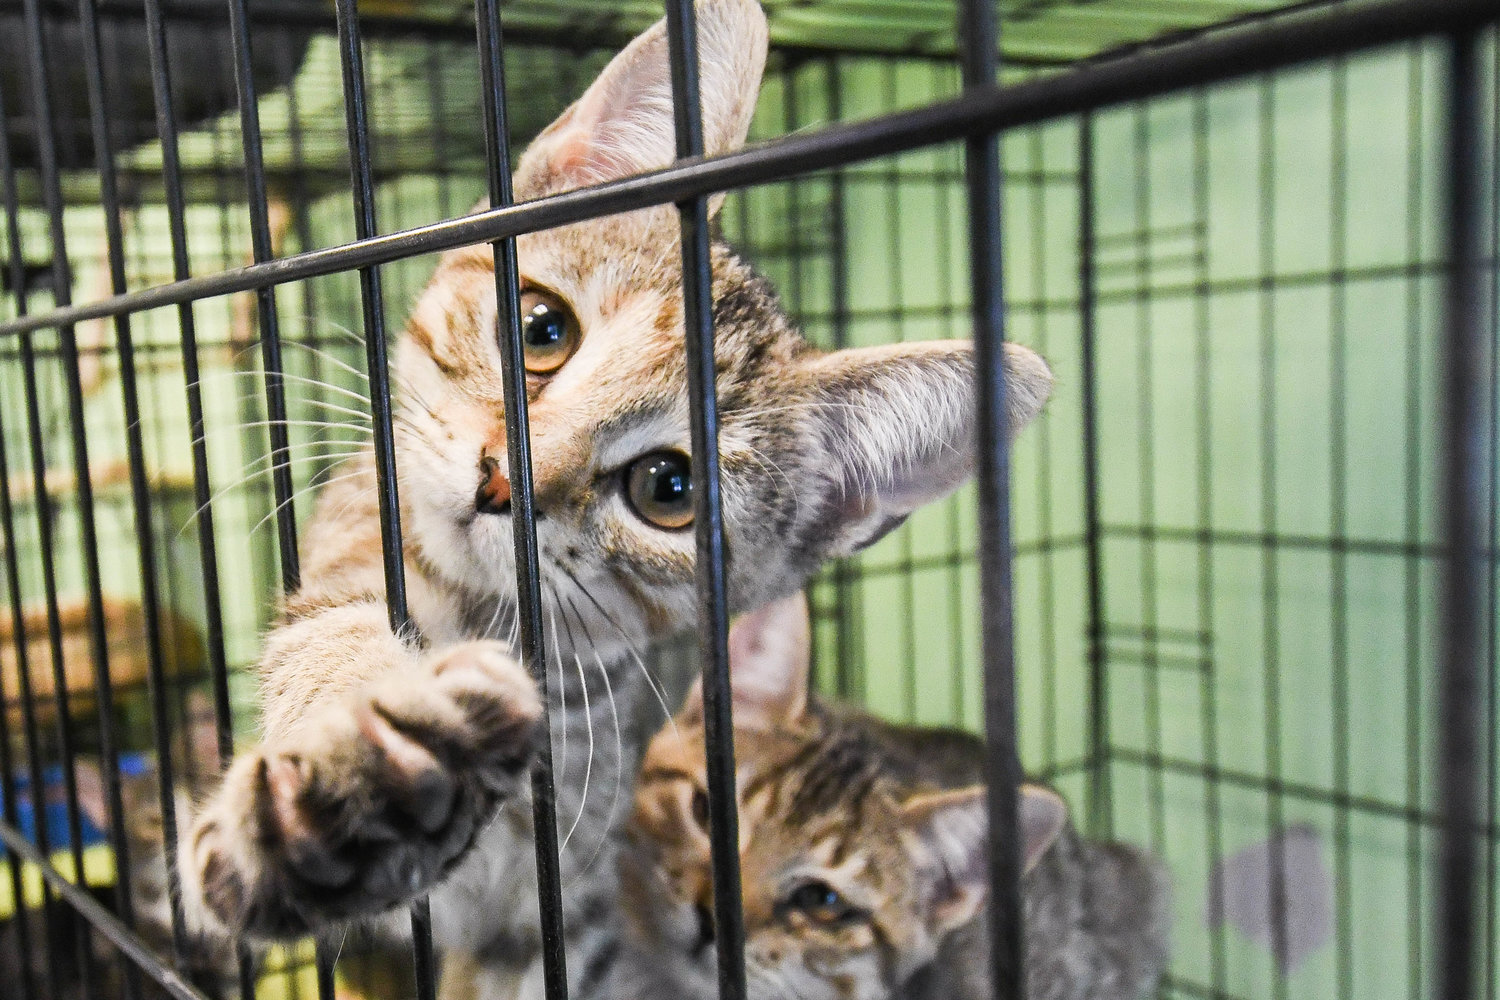 A kitten reaches through a cage to play on Wednesday, Dec. 14 at Anita’s Stevens Swan Humane Society in Utica. Shelters in Oneida and Madison counties are experiencing higher volumes of surrenders and animals in need of medical care.